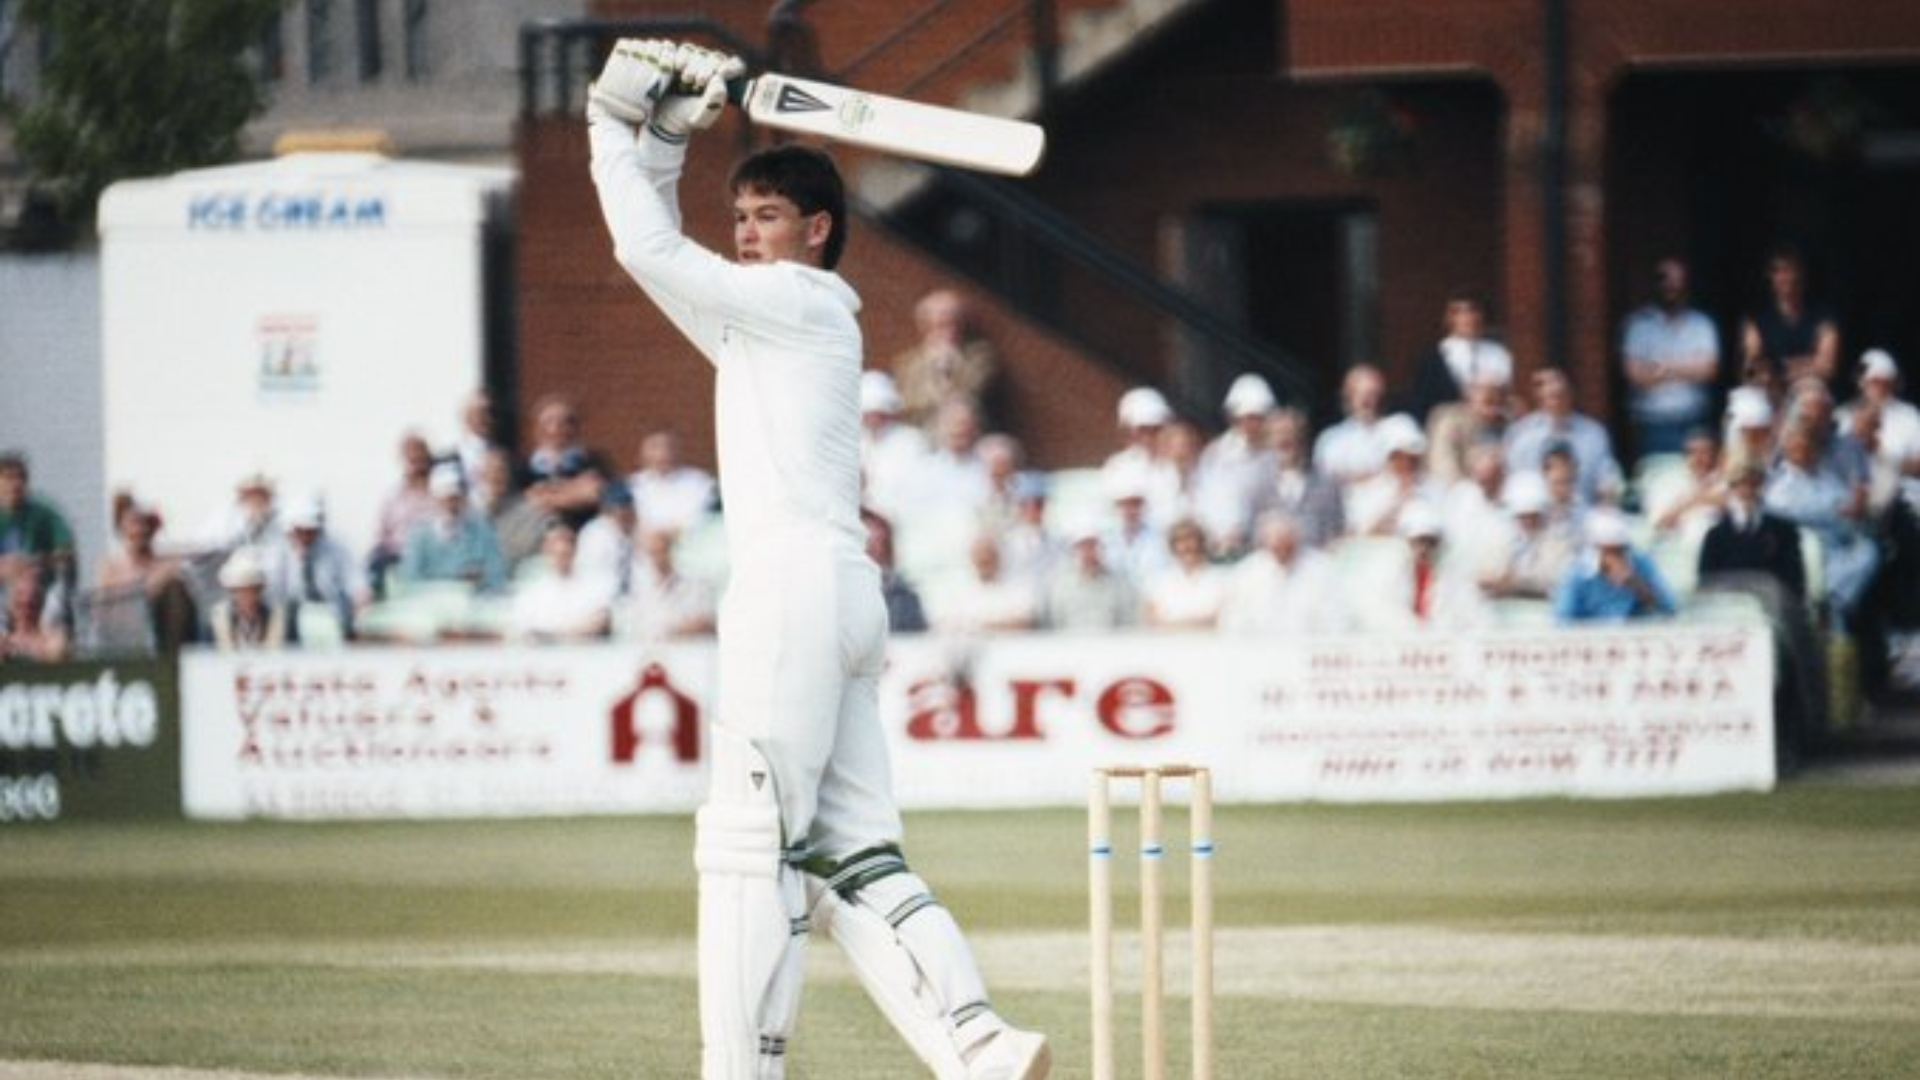 Graeme Hick scored 405 at a strike-rate of 86 with 35 fours and 11 sixes.